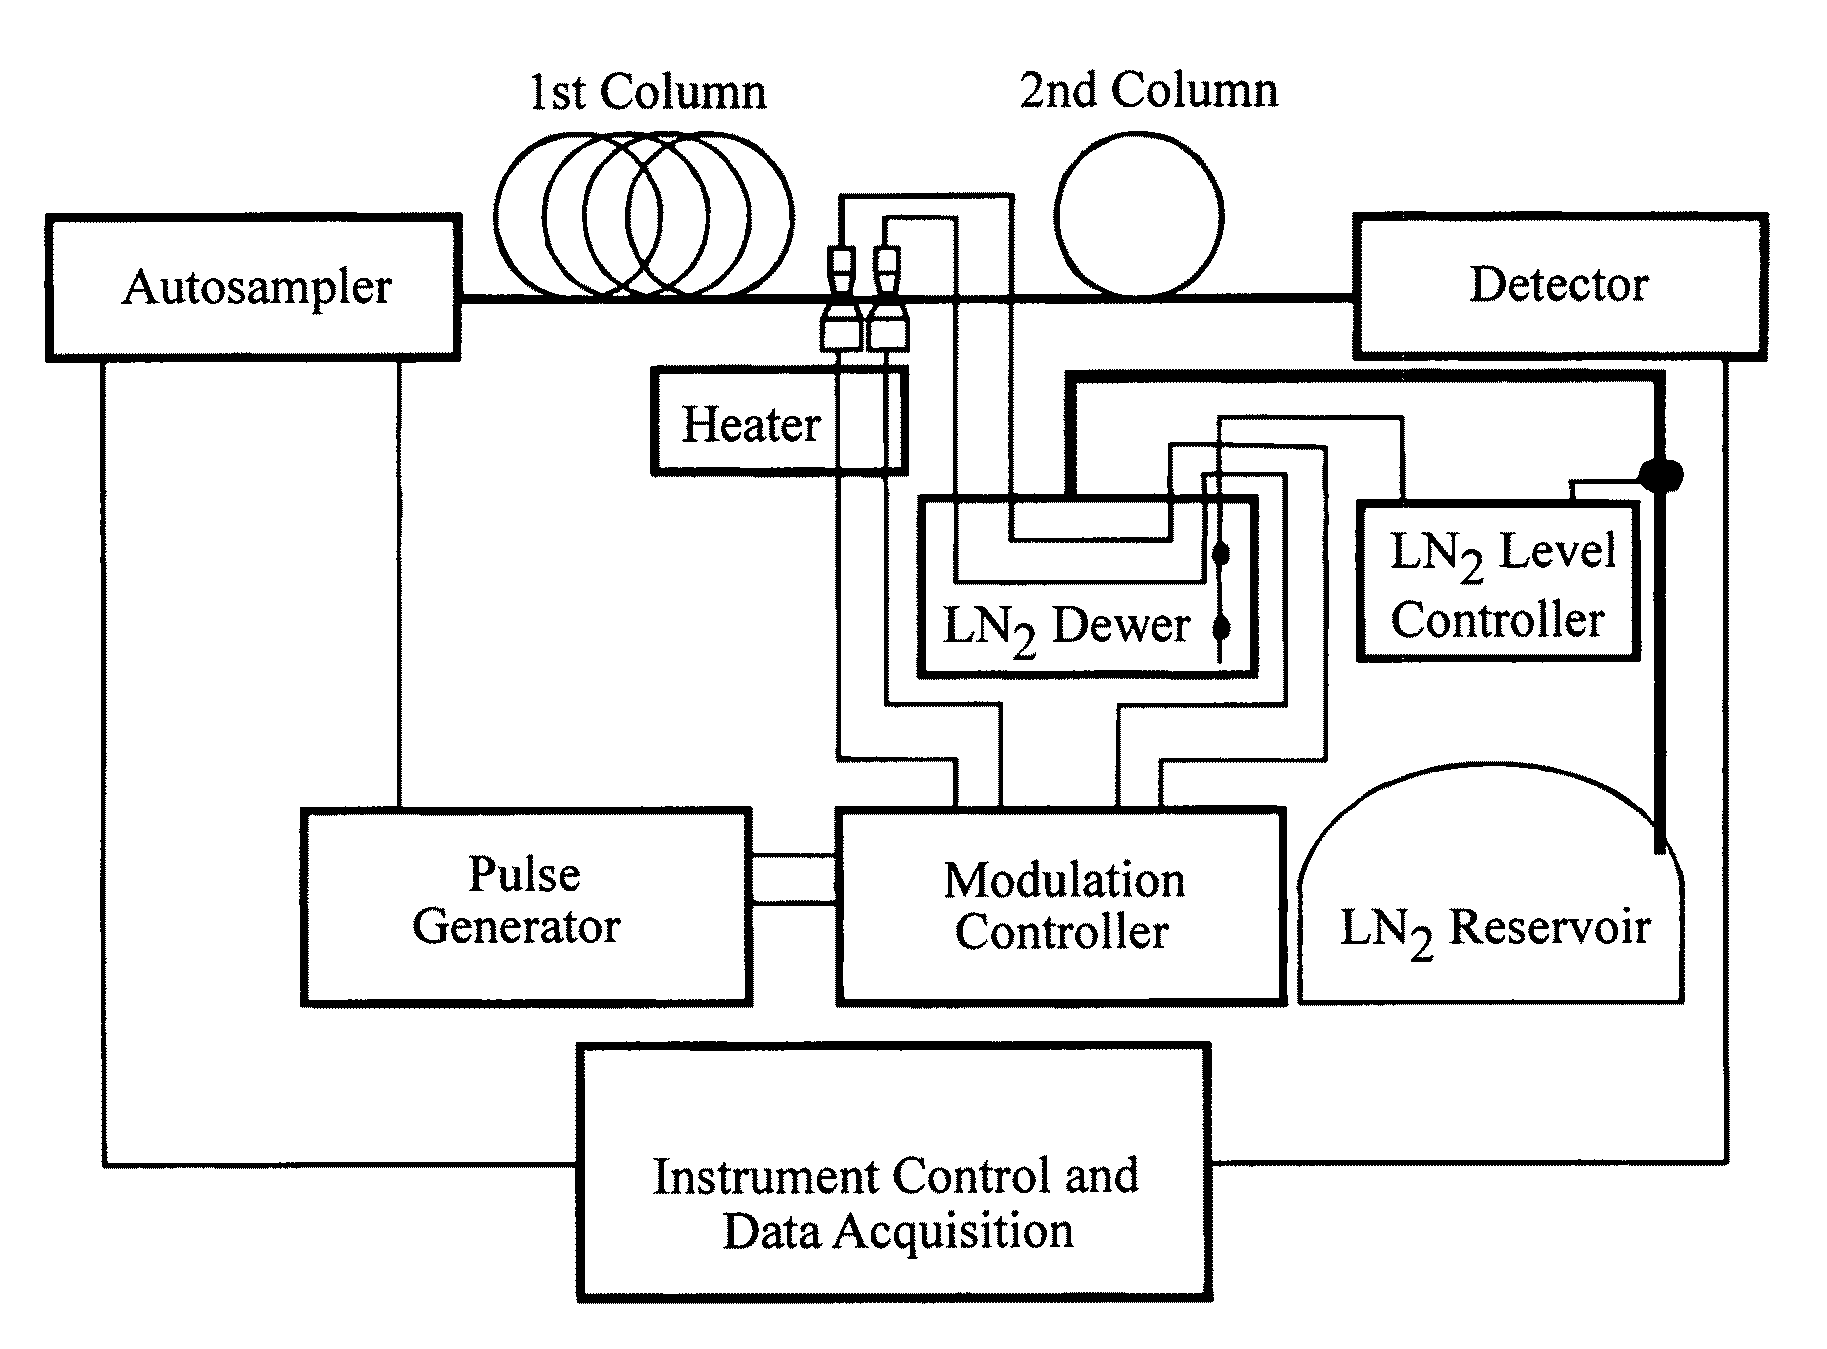 System and method that will synchronize data acquisition and modulation in a comprehensive two (multi) dimensional chromatography (separation) system to enable quantitative data analysis